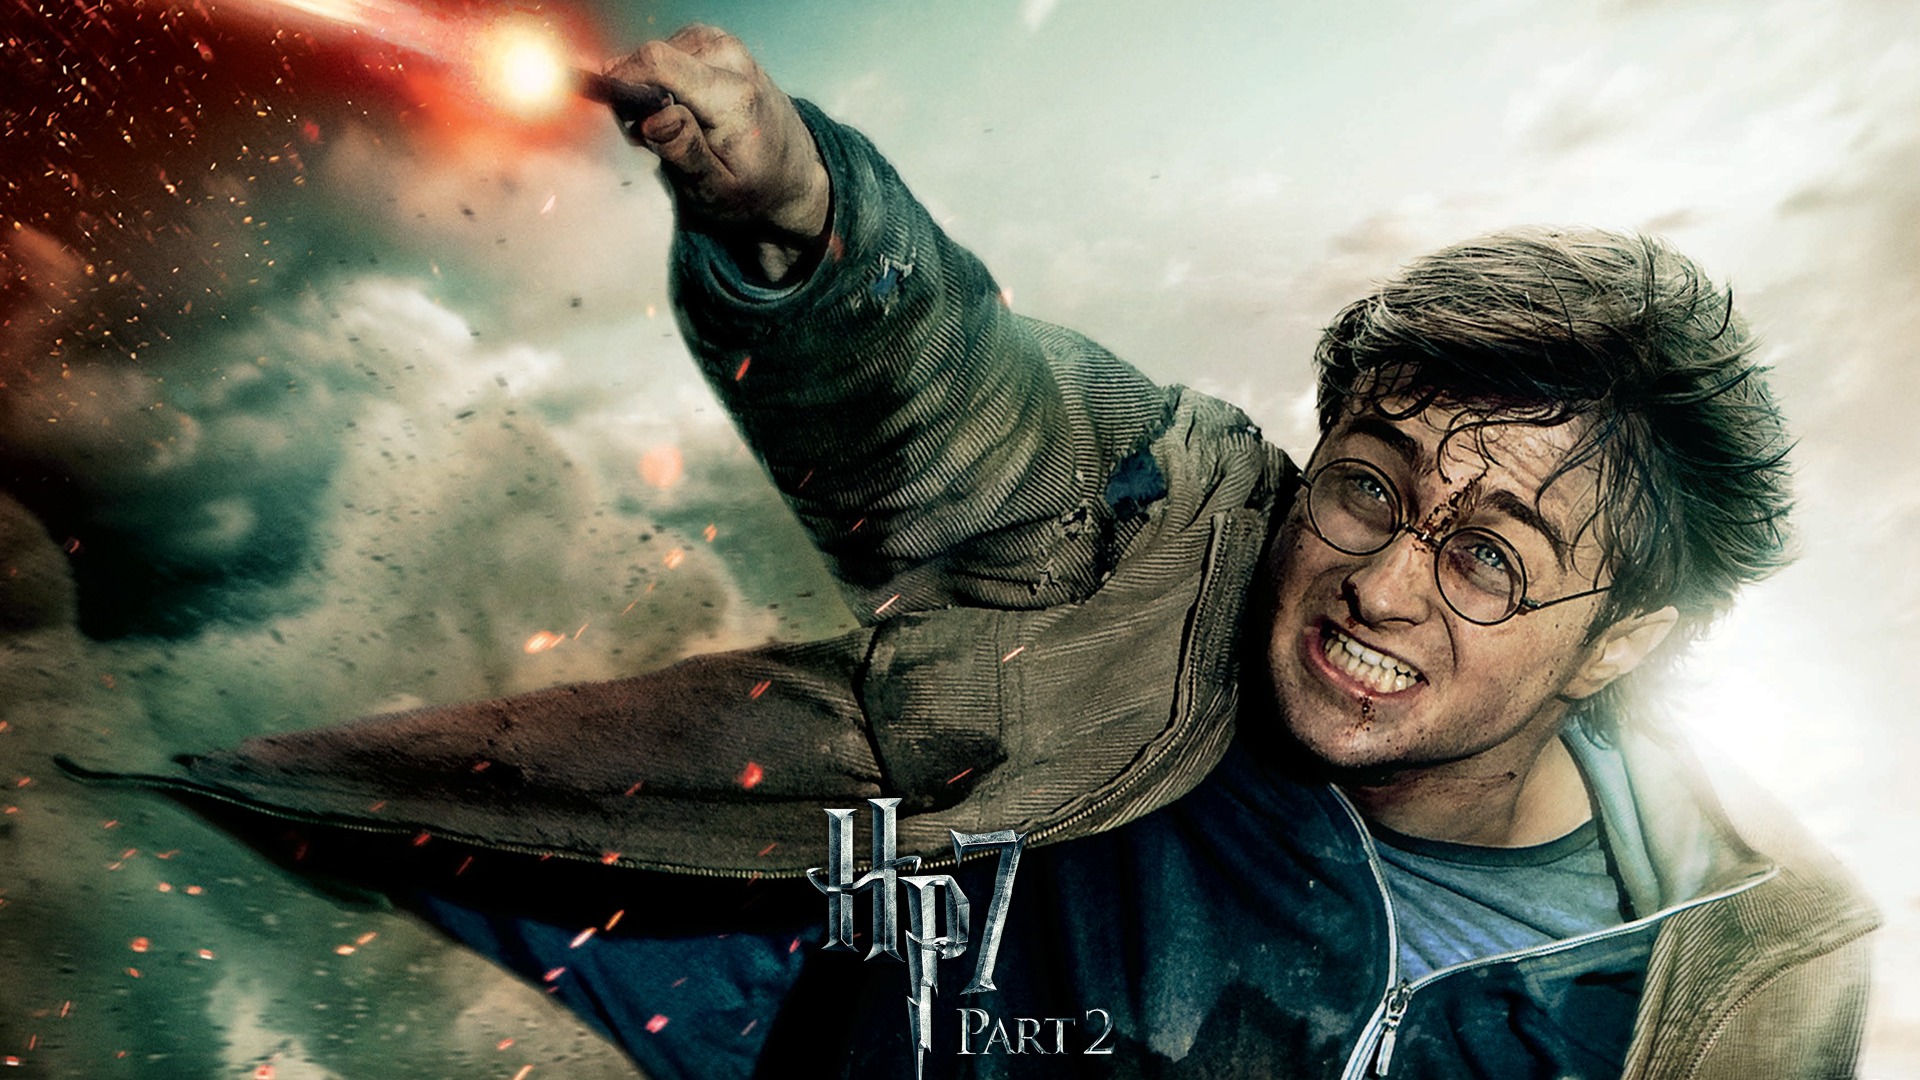 Harry Potter and the Deathly Hallows 哈利·波特与死亡圣器 高清壁纸22 - 1920x1080